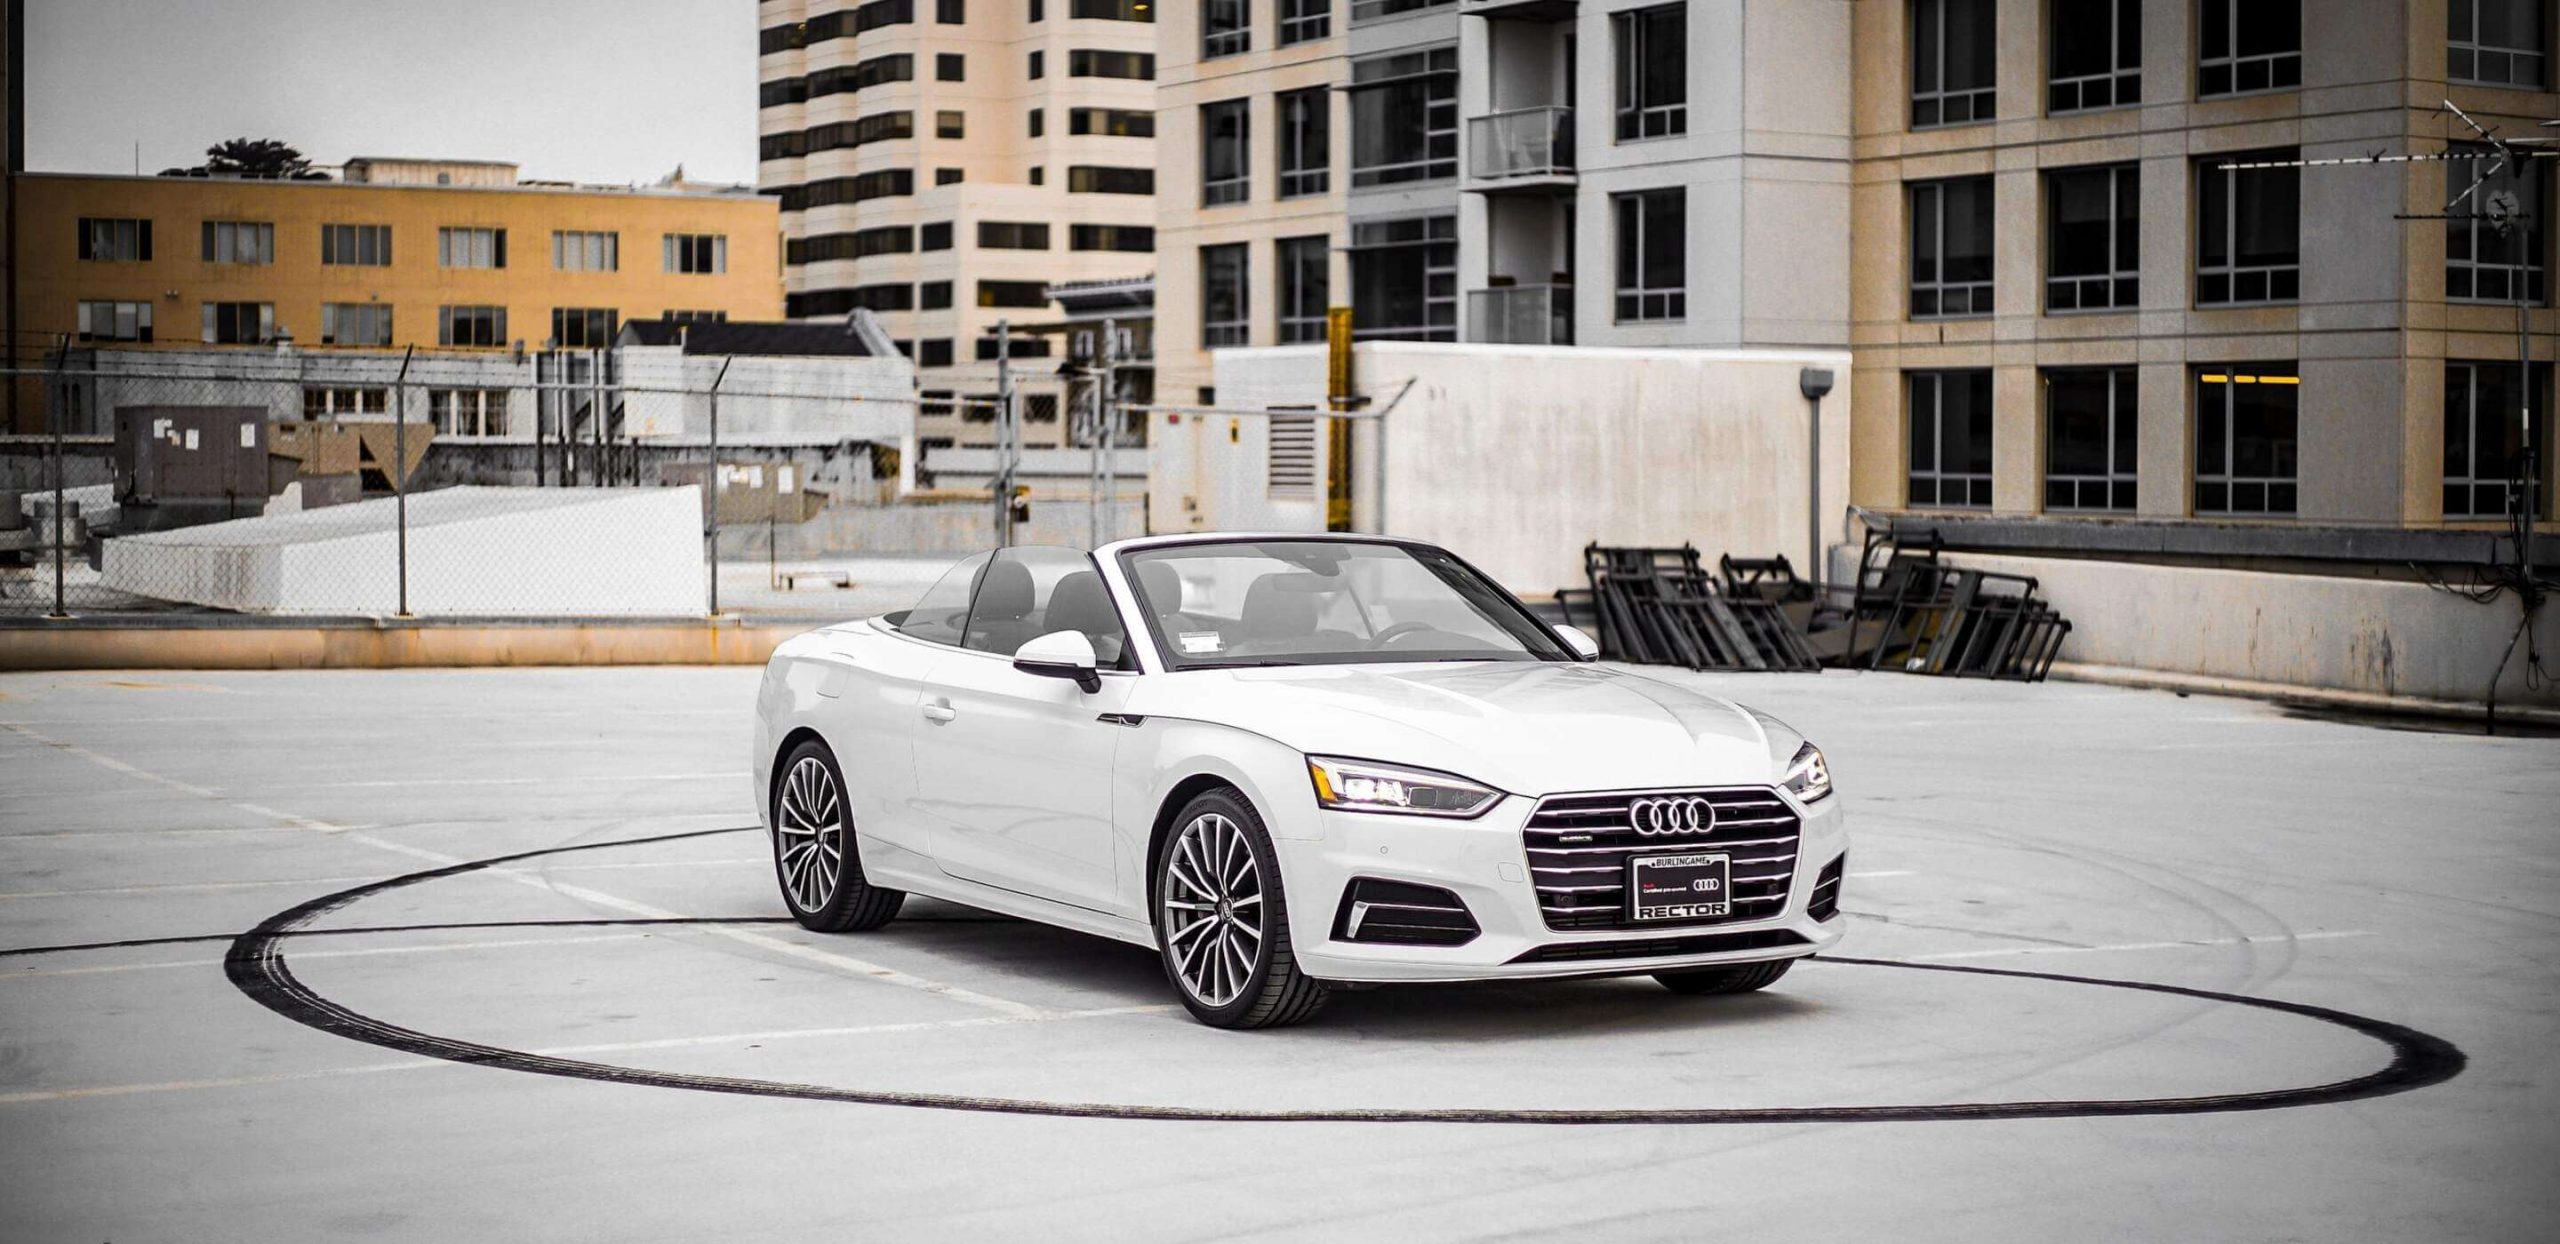 2018-audi-a5-white-featured-image